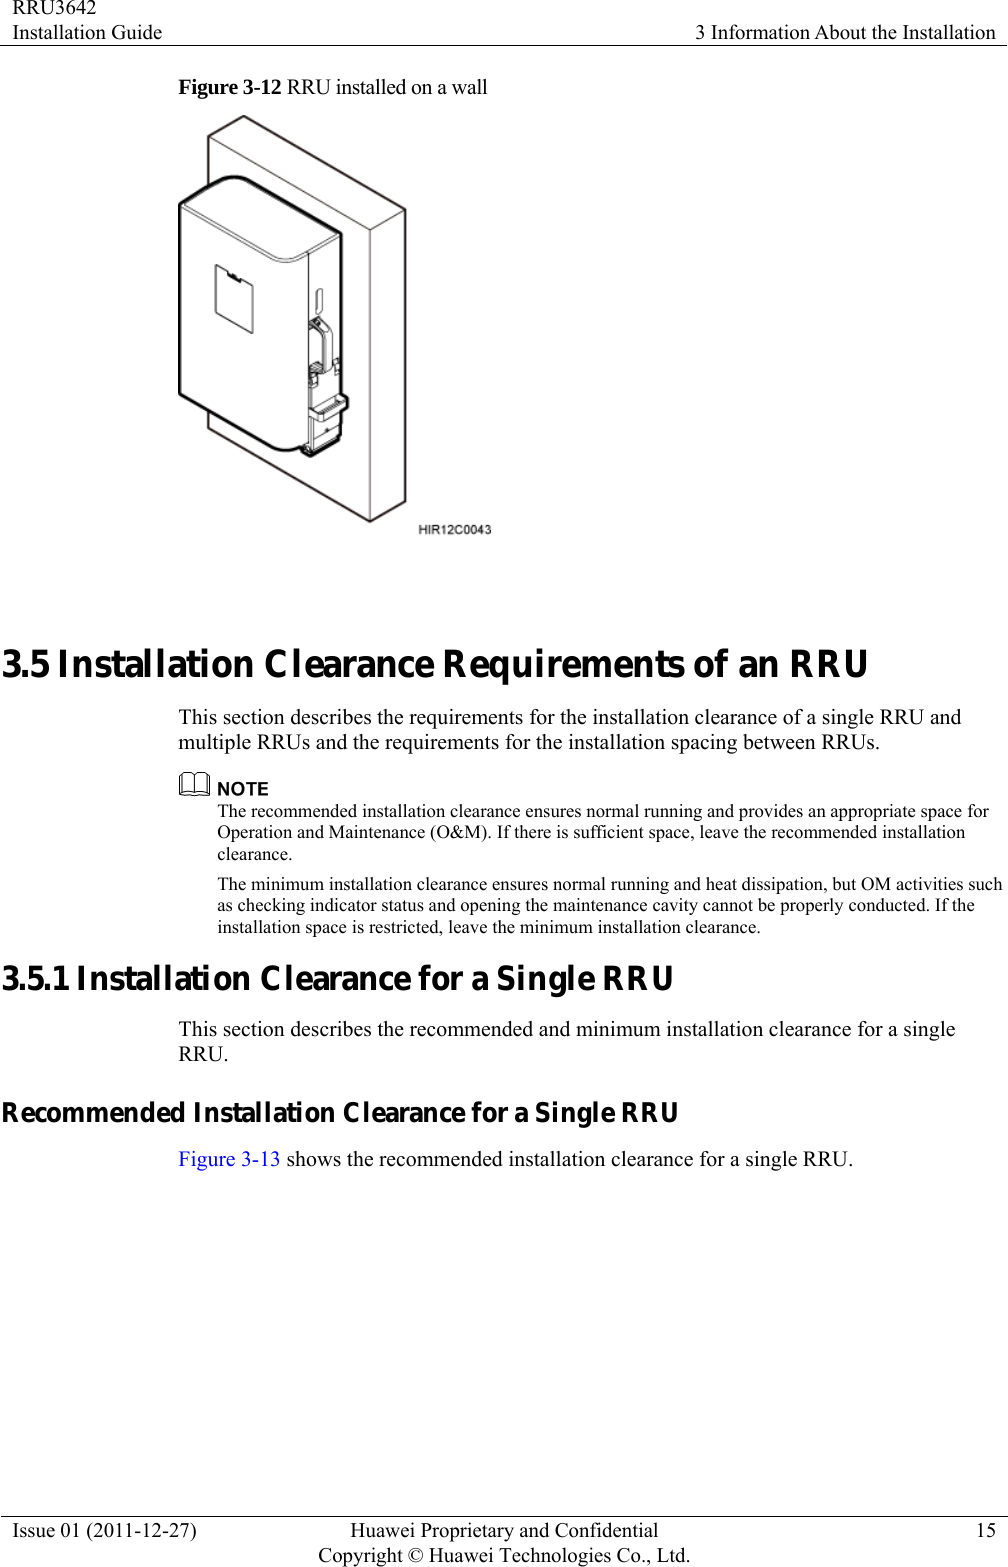 RRU3642 Installation Guide  3 Information About the Installation Issue 01 (2011-12-27)  Huawei Proprietary and Confidential         Copyright © Huawei Technologies Co., Ltd.15 Figure 3-12 RRU installed on a wall   3.5 Installation Clearance Requirements of an RRU This section describes the requirements for the installation clearance of a single RRU and multiple RRUs and the requirements for the installation spacing between RRUs.  The recommended installation clearance ensures normal running and provides an appropriate space for Operation and Maintenance (O&amp;M). If there is sufficient space, leave the recommended installation clearance. The minimum installation clearance ensures normal running and heat dissipation, but OM activities such as checking indicator status and opening the maintenance cavity cannot be properly conducted. If the installation space is restricted, leave the minimum installation clearance. 3.5.1 Installation Clearance for a Single RRU This section describes the recommended and minimum installation clearance for a single RRU. Recommended Installation Clearance for a Single RRU Figure 3-13 shows the recommended installation clearance for a single RRU. 